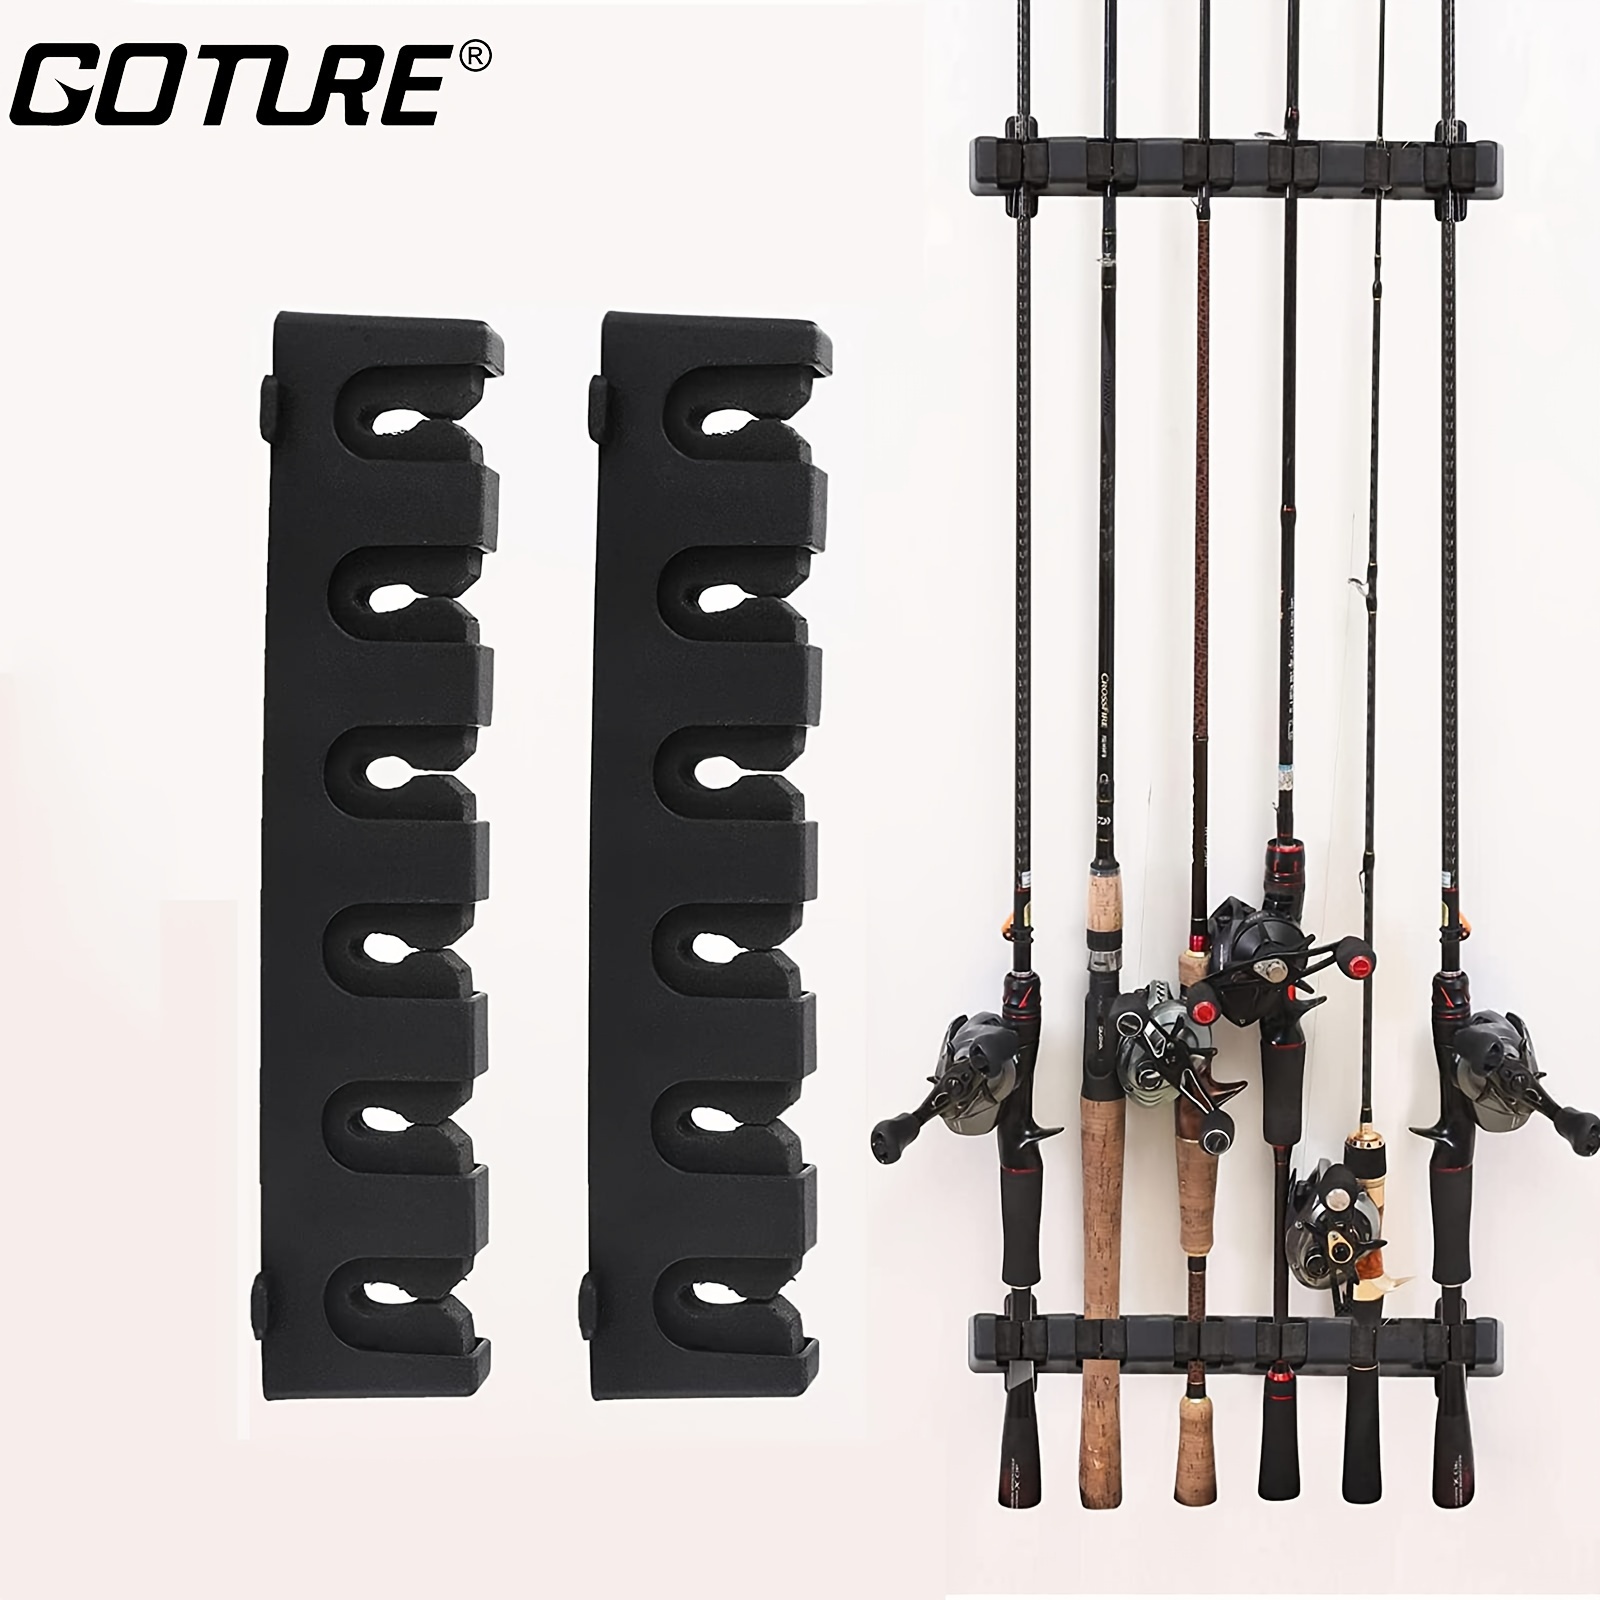  Ghosthorn Holds Up to 6 Rods Fishing Pole Rod Racks Wall or  Ceiling Mounted Fishing Pole Rod Holders for Garage Storage Organizer Fishing  Gear Equipment Gifts for Men Women : Sports